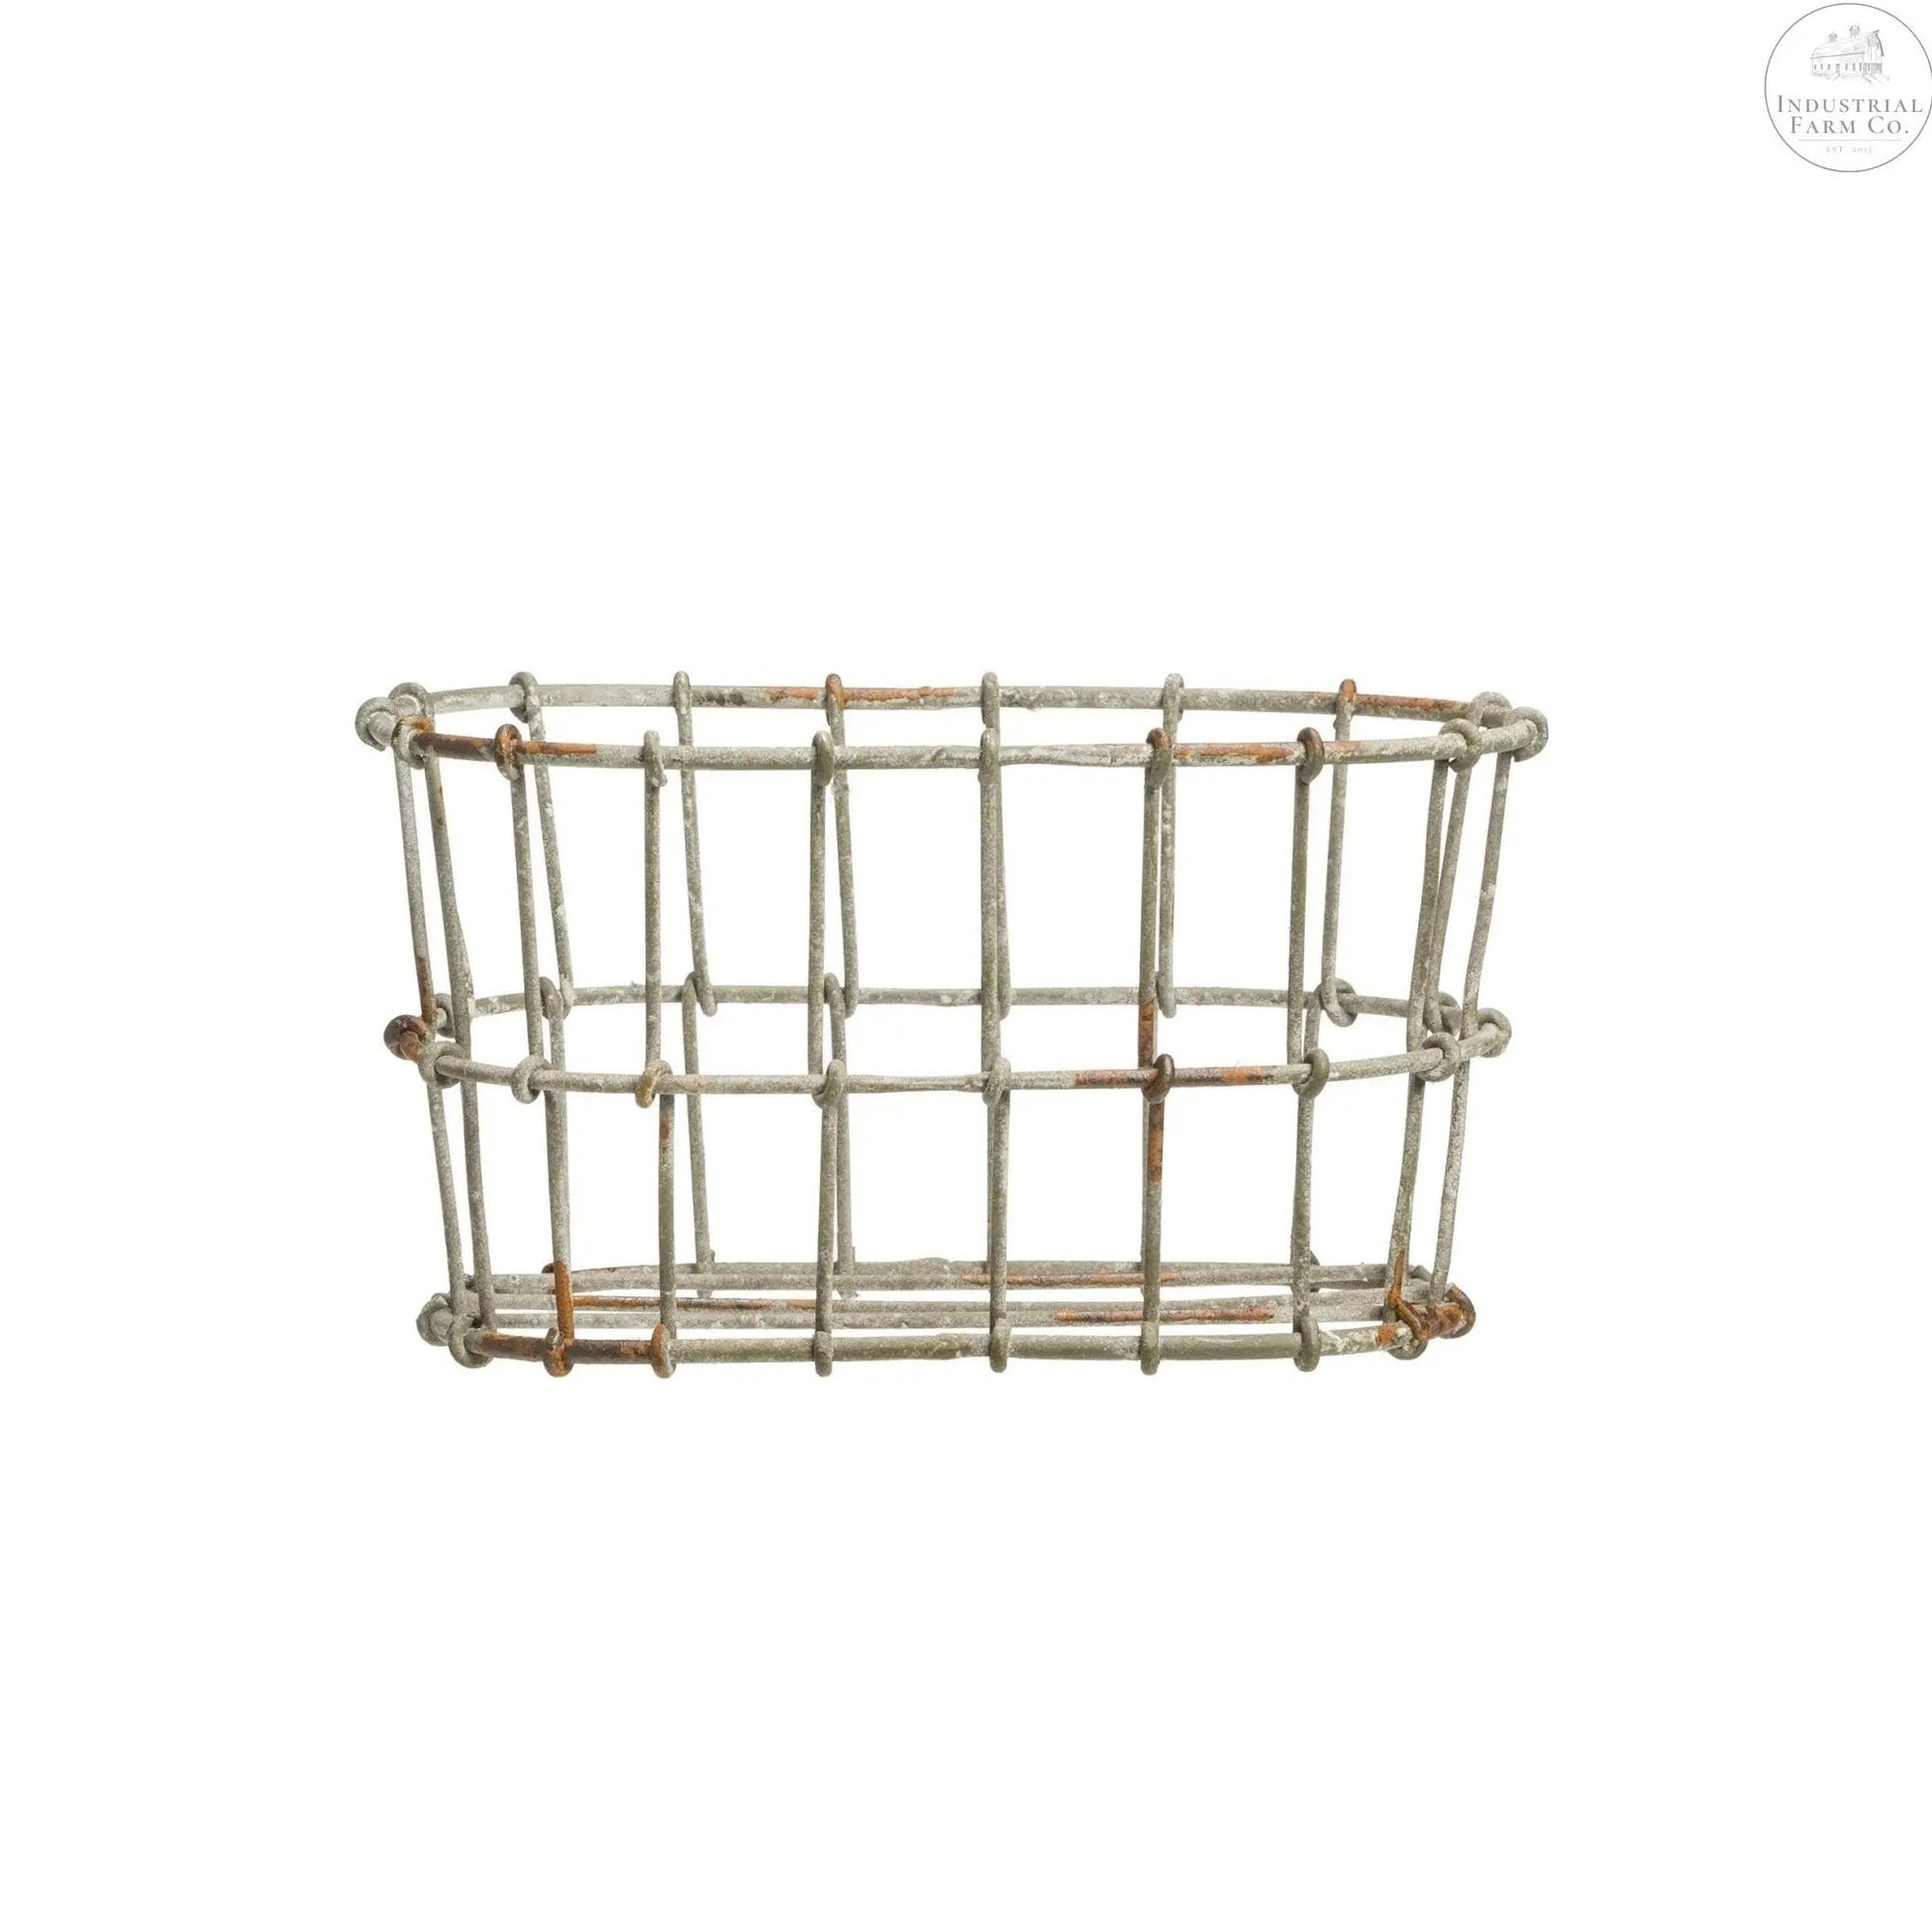 Unique Country Aged Wire Basket Home & Garden    | Industrial Farm Co